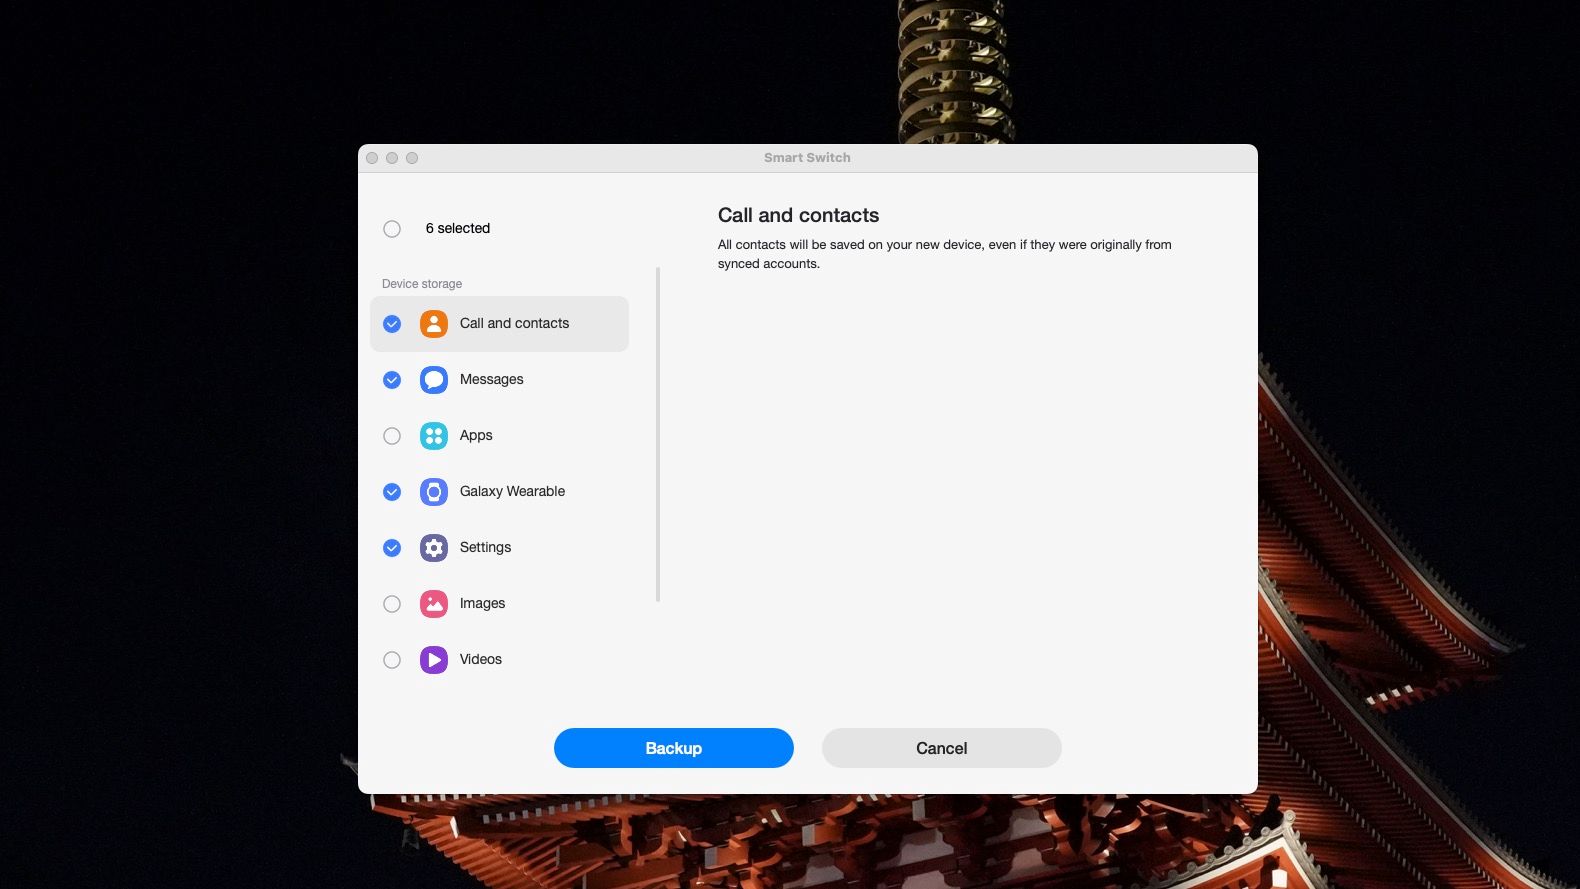 Samsung Smart Switch app on Mac with various backup options